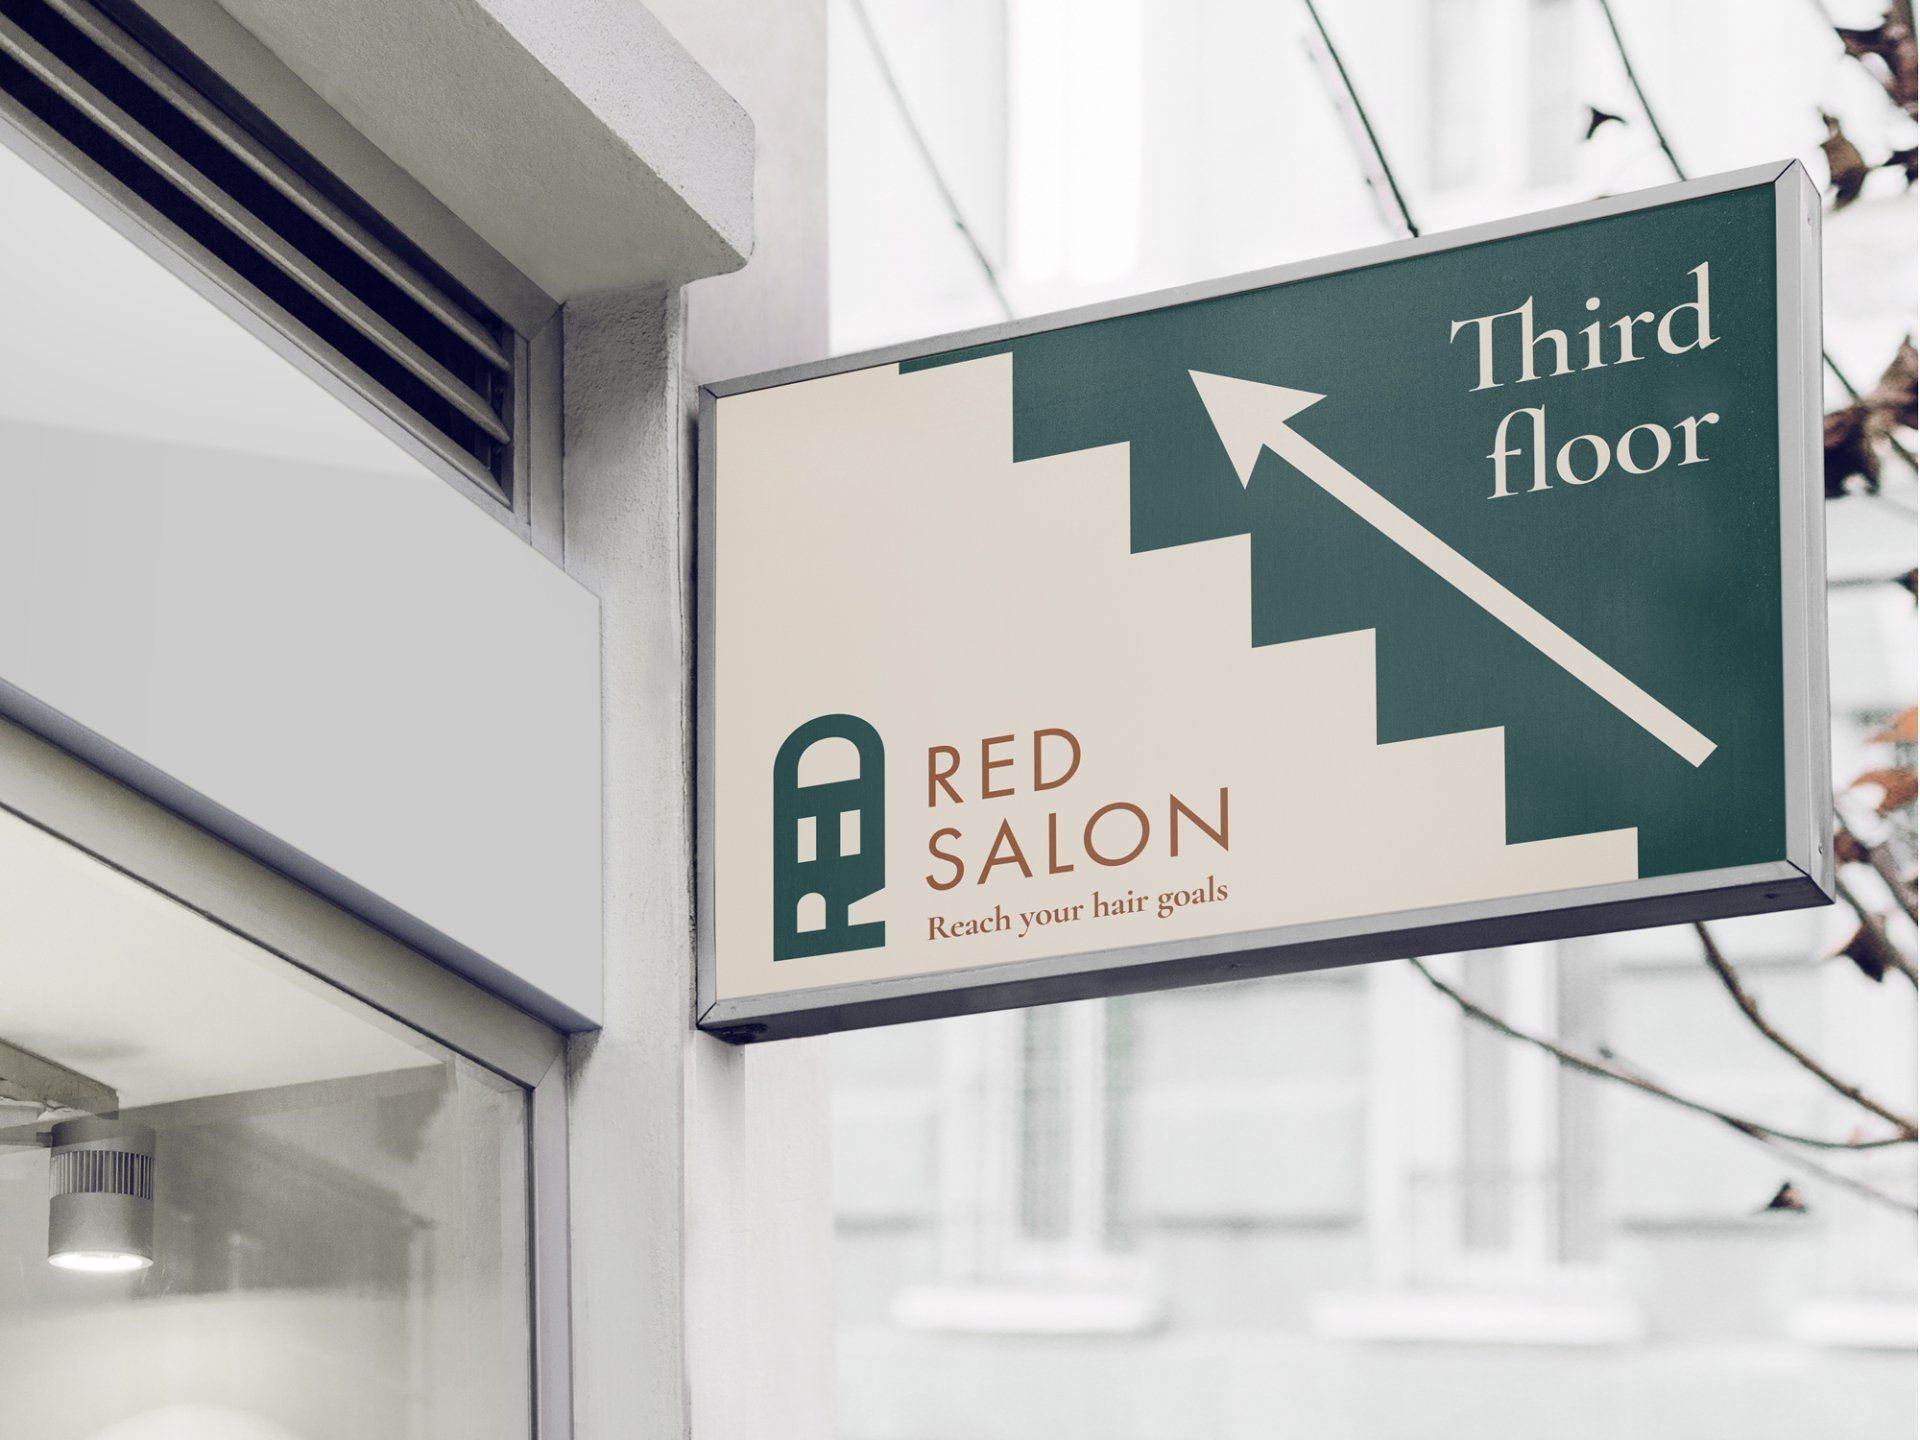 Red Salon way-finding sign